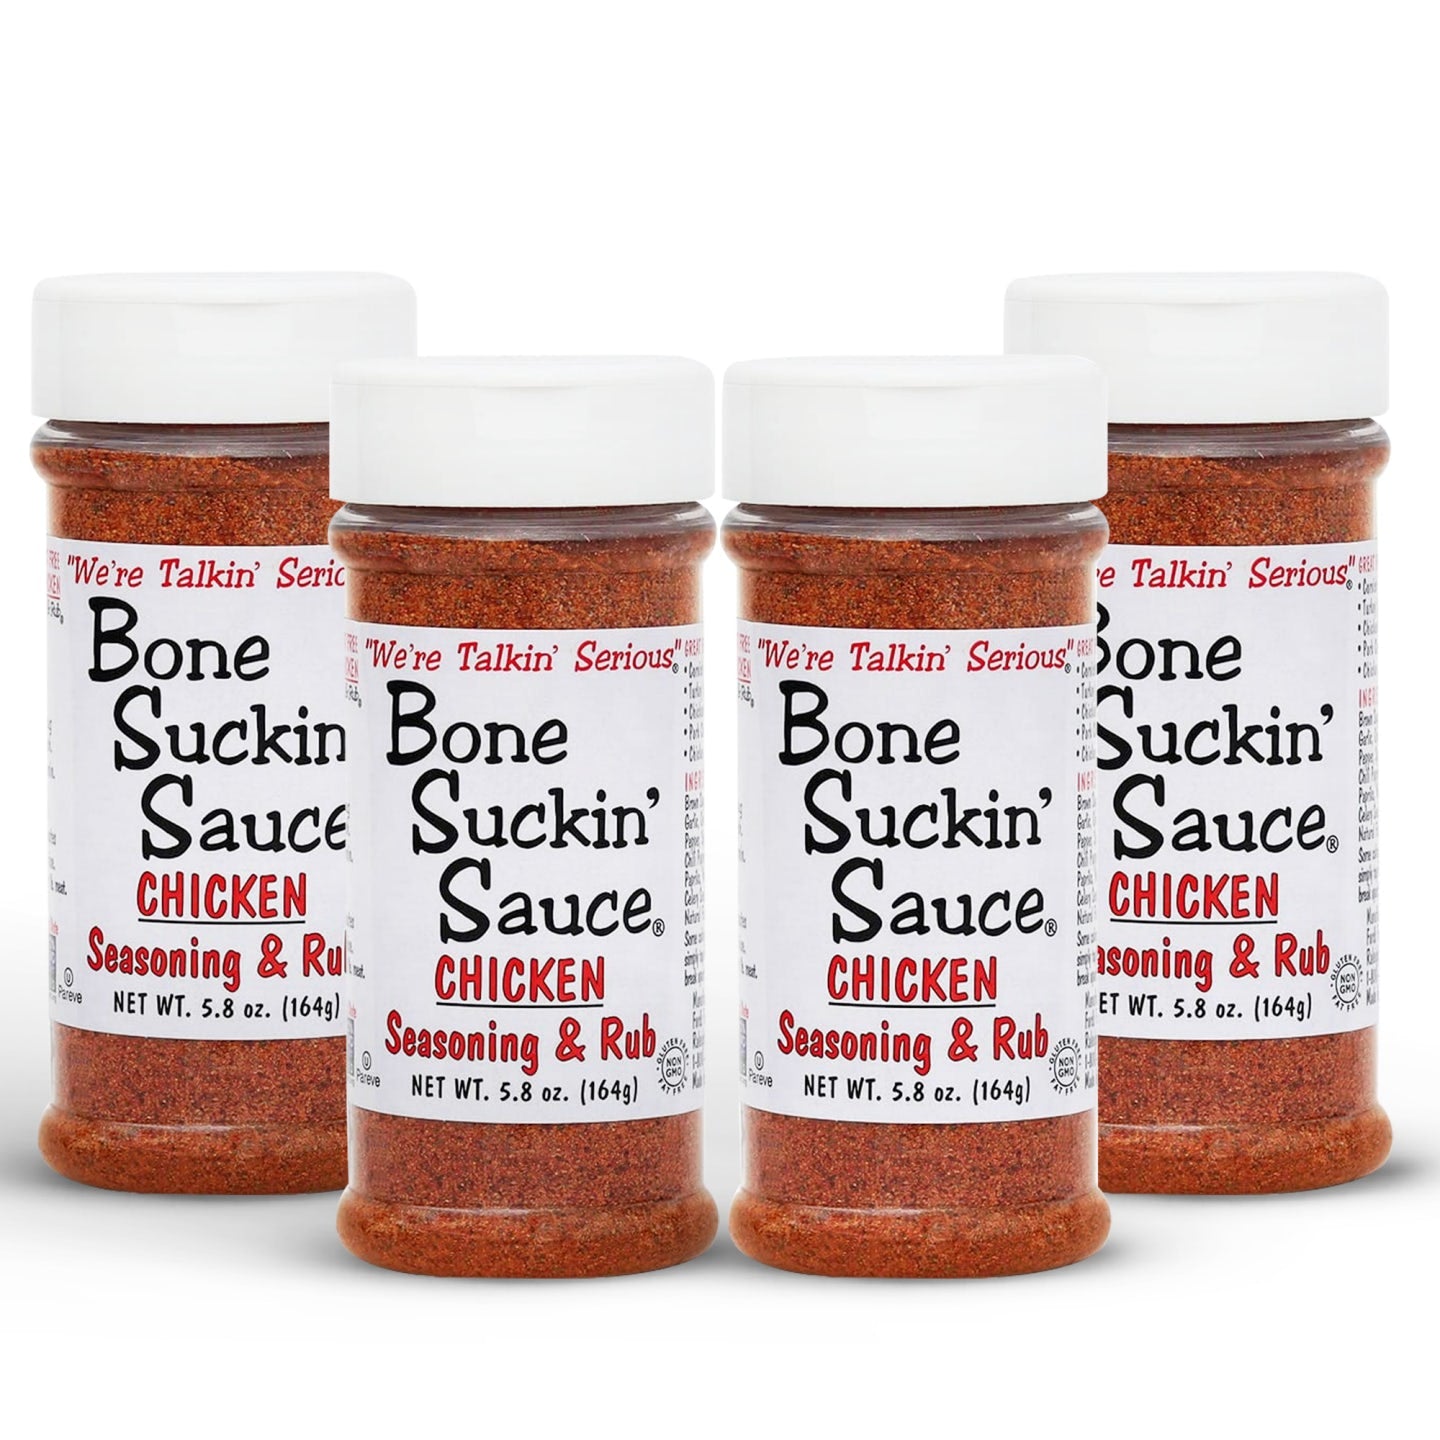 Bone Suckin'® Chicken Seasoning & Rub, 5.8 oz. A lighter blend of the brown sugar, paprika and spices found in the Original Seasoning & Rub, garlic and sage come to the forefront of our poultry blend. While it’s perfect on chicken, turkey, and fish, like our other seasoning & rub products, it’s versatile enough to be used on just about anything. 4 pack.